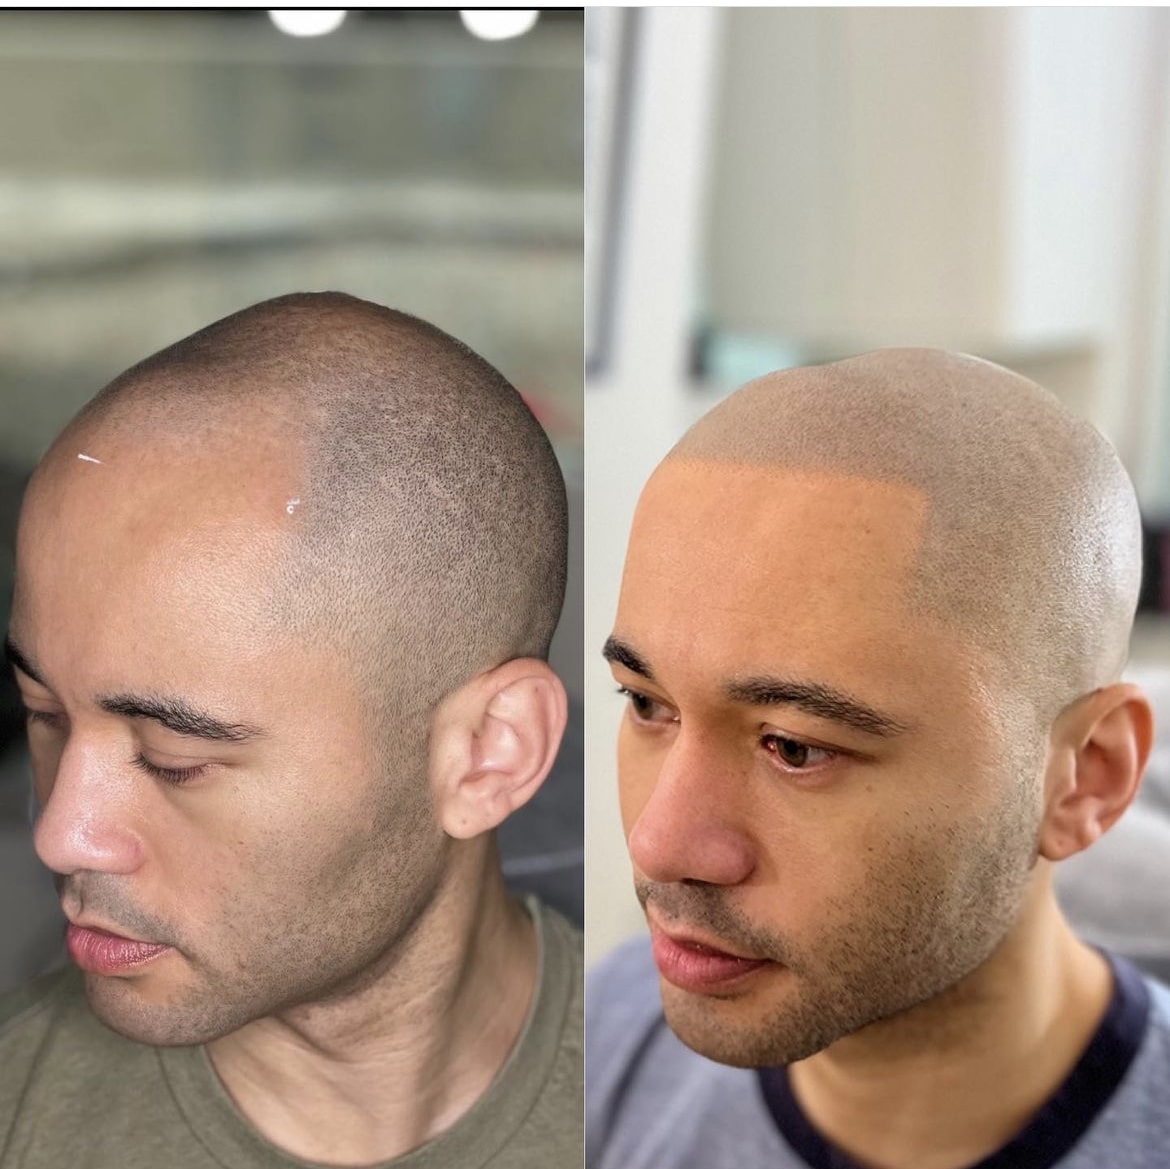 Man's scalp micropigmentation before and after photos